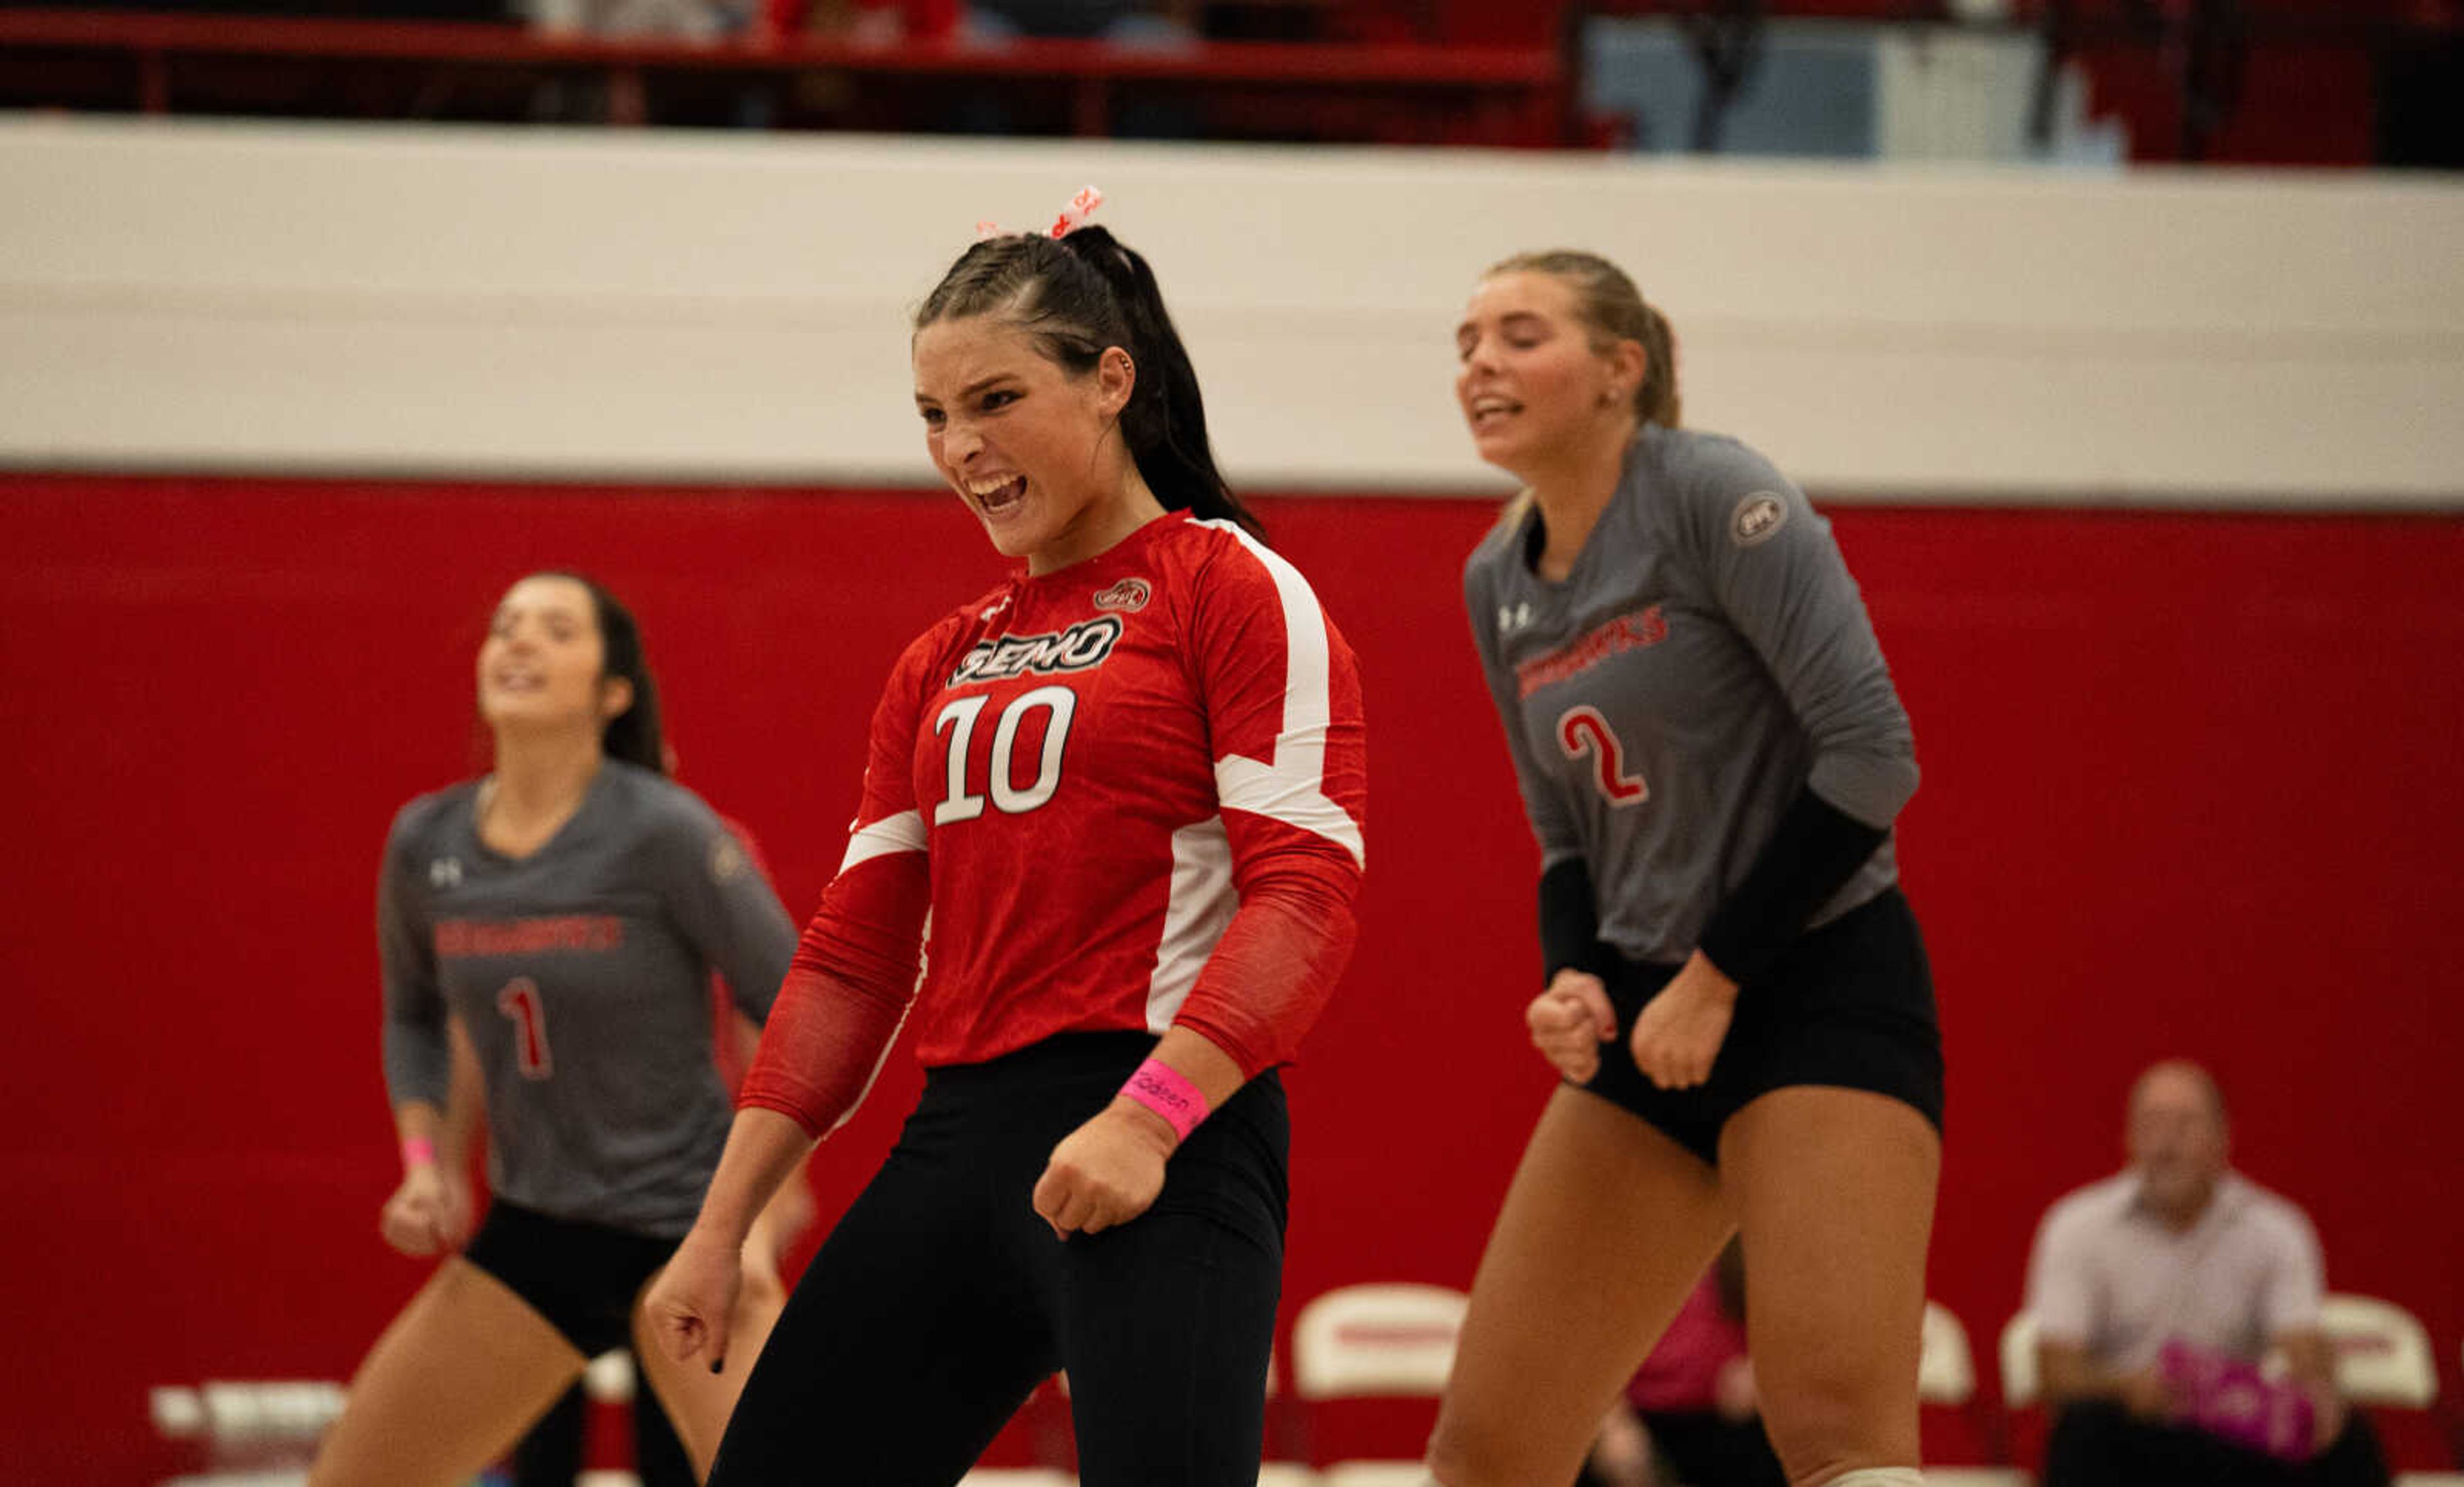 SEMO graduate student libero Tara Beilsmith (10)celebrates a big play with freshmen libero Nina Schuberth and outside hitter Lucy Ardnt on the during SEMO match against UT-Martin on Oct. 6 at Houck Field House. The Redhawks would sweep UT-Martin in three straight sets.